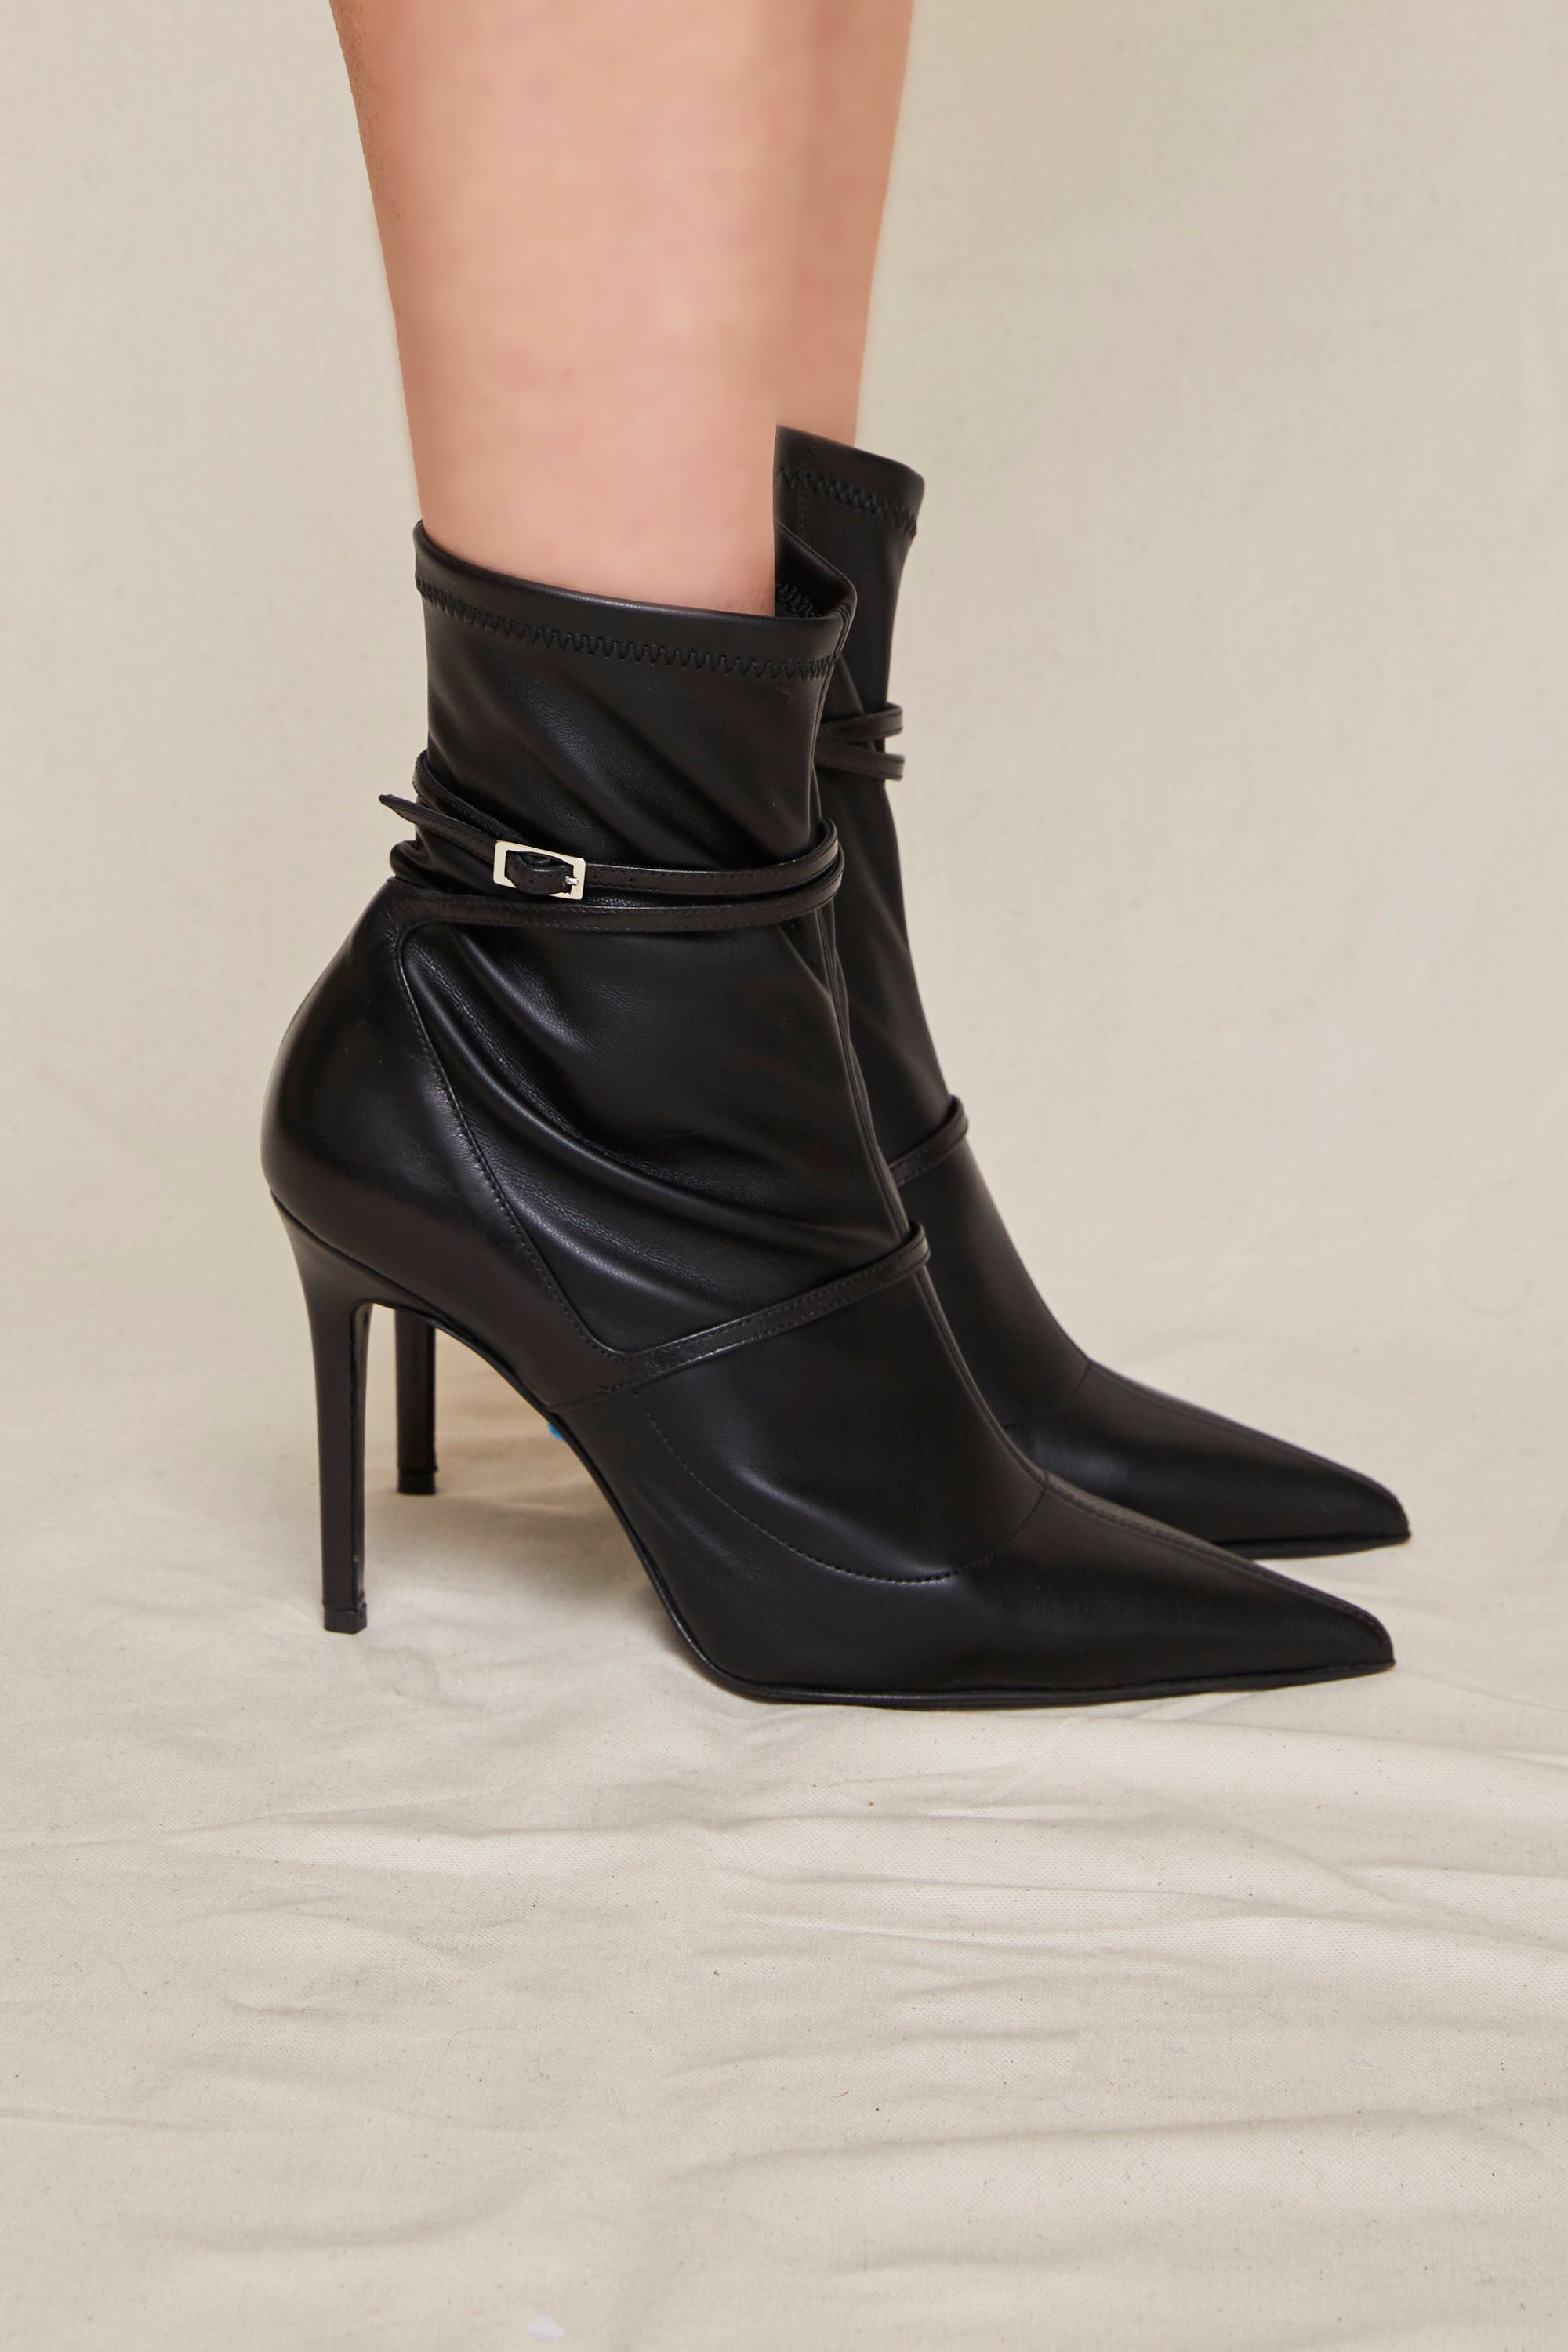 K95 STRETCH ANKLE BOOTS BLACK